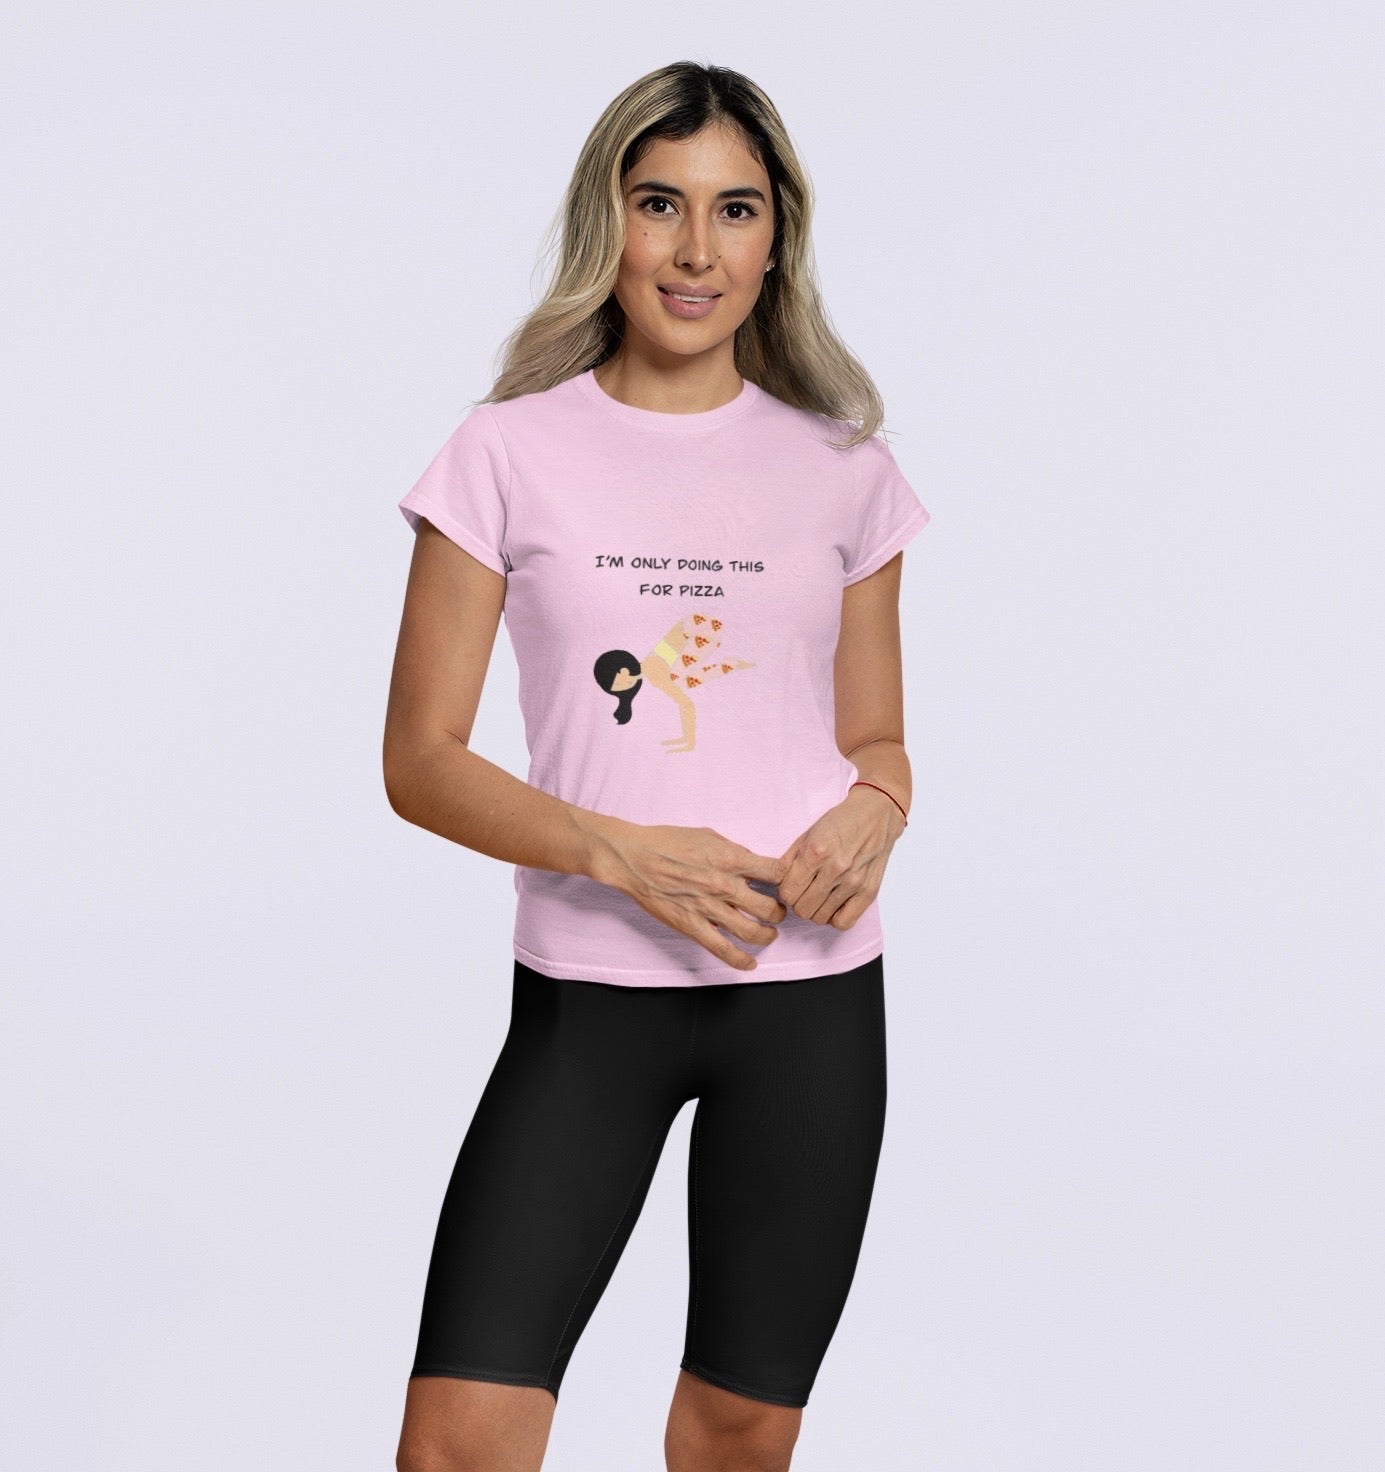 I’m only doing this for PIZZA. Yoga T-shirt